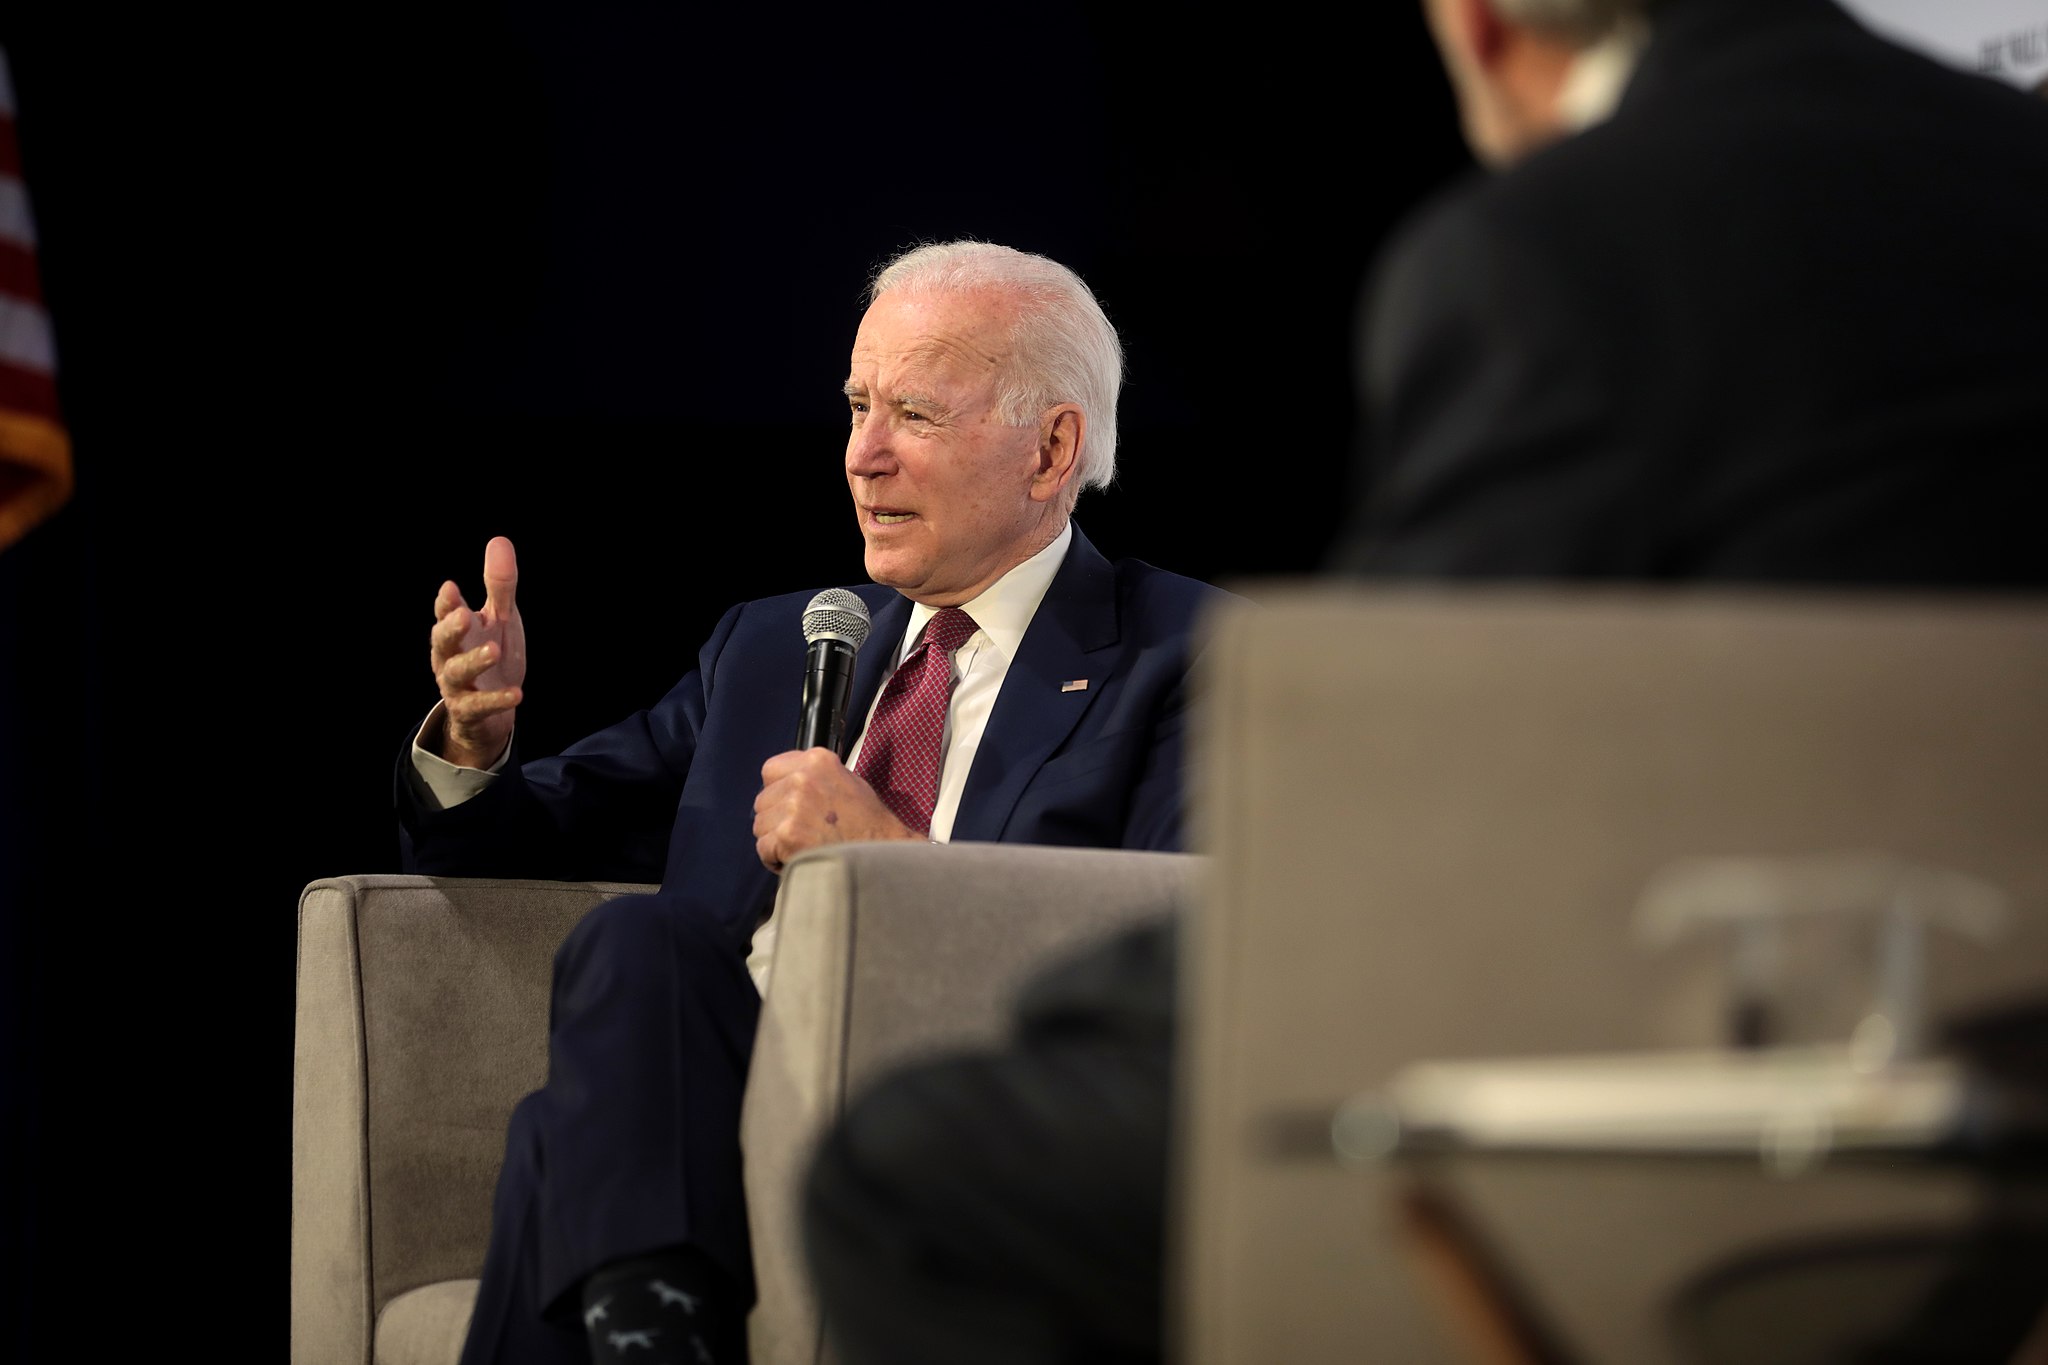 Joe Biden speaks with attendees at the Moving America Forward Forum hosted by United for Infrastructure at the Student Union at the University of Nevada, Las Vegas, in February 2020 